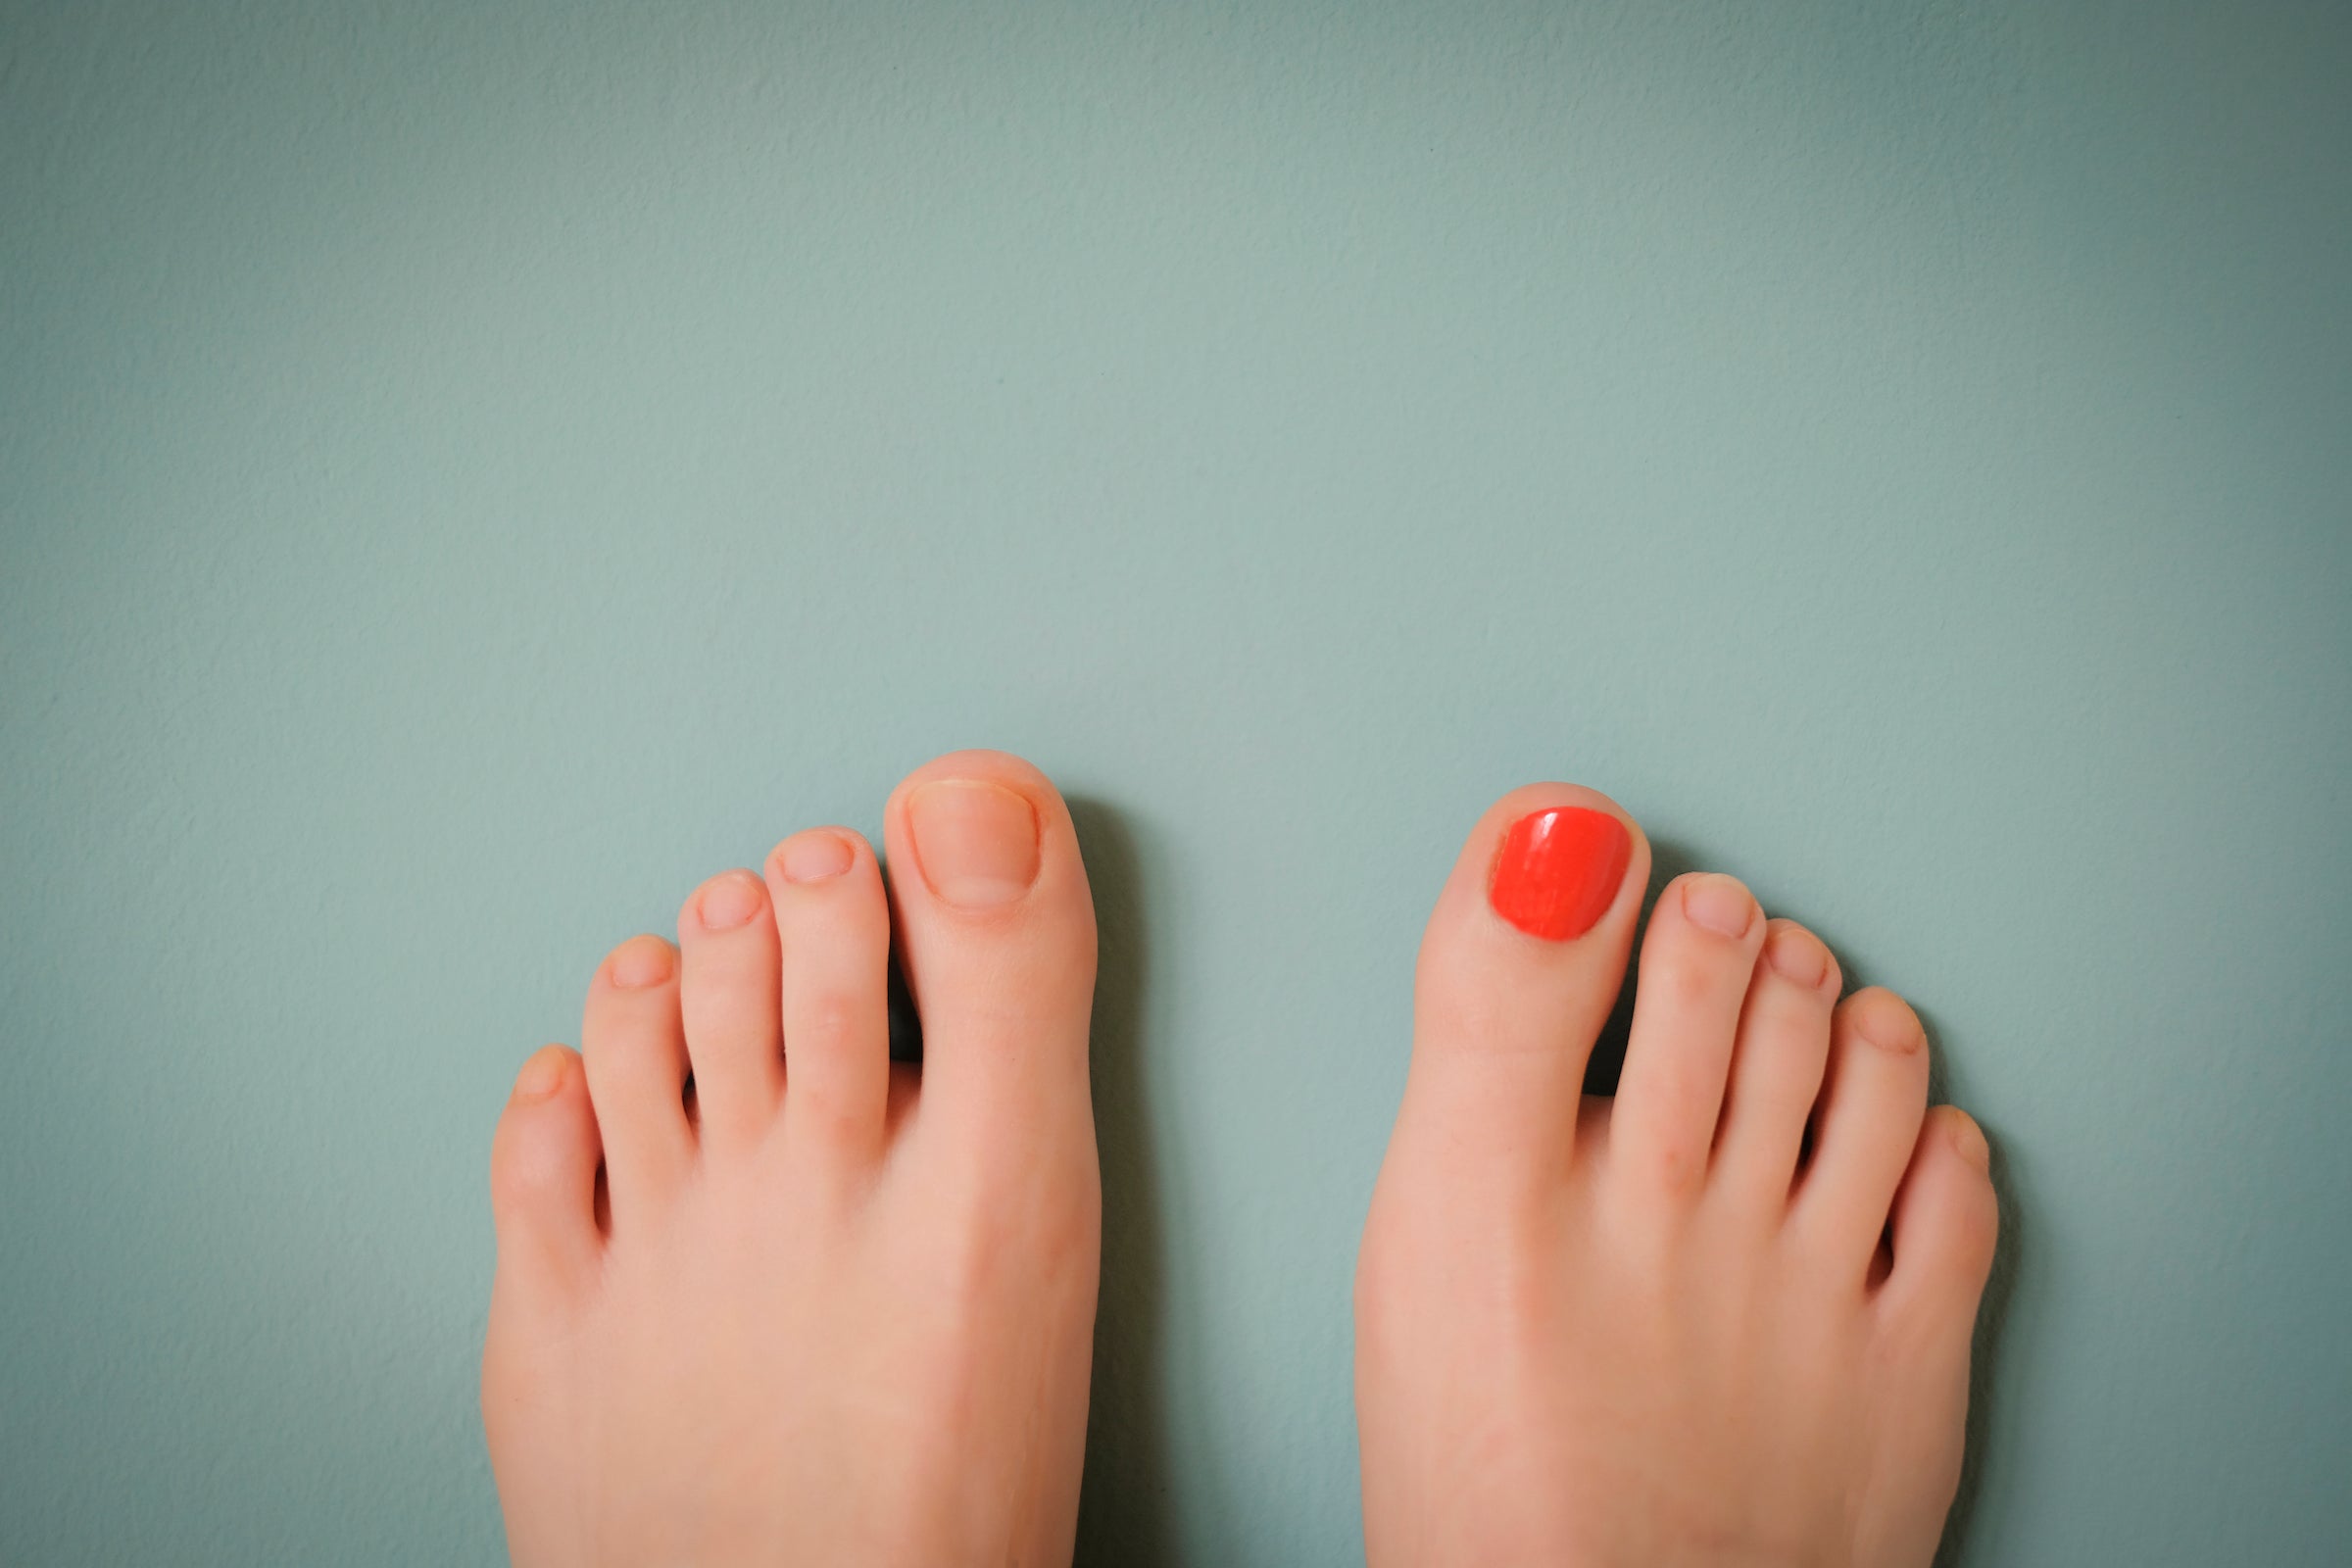 What's Causing The Black Spot Beneath My Nail? – My FootDr